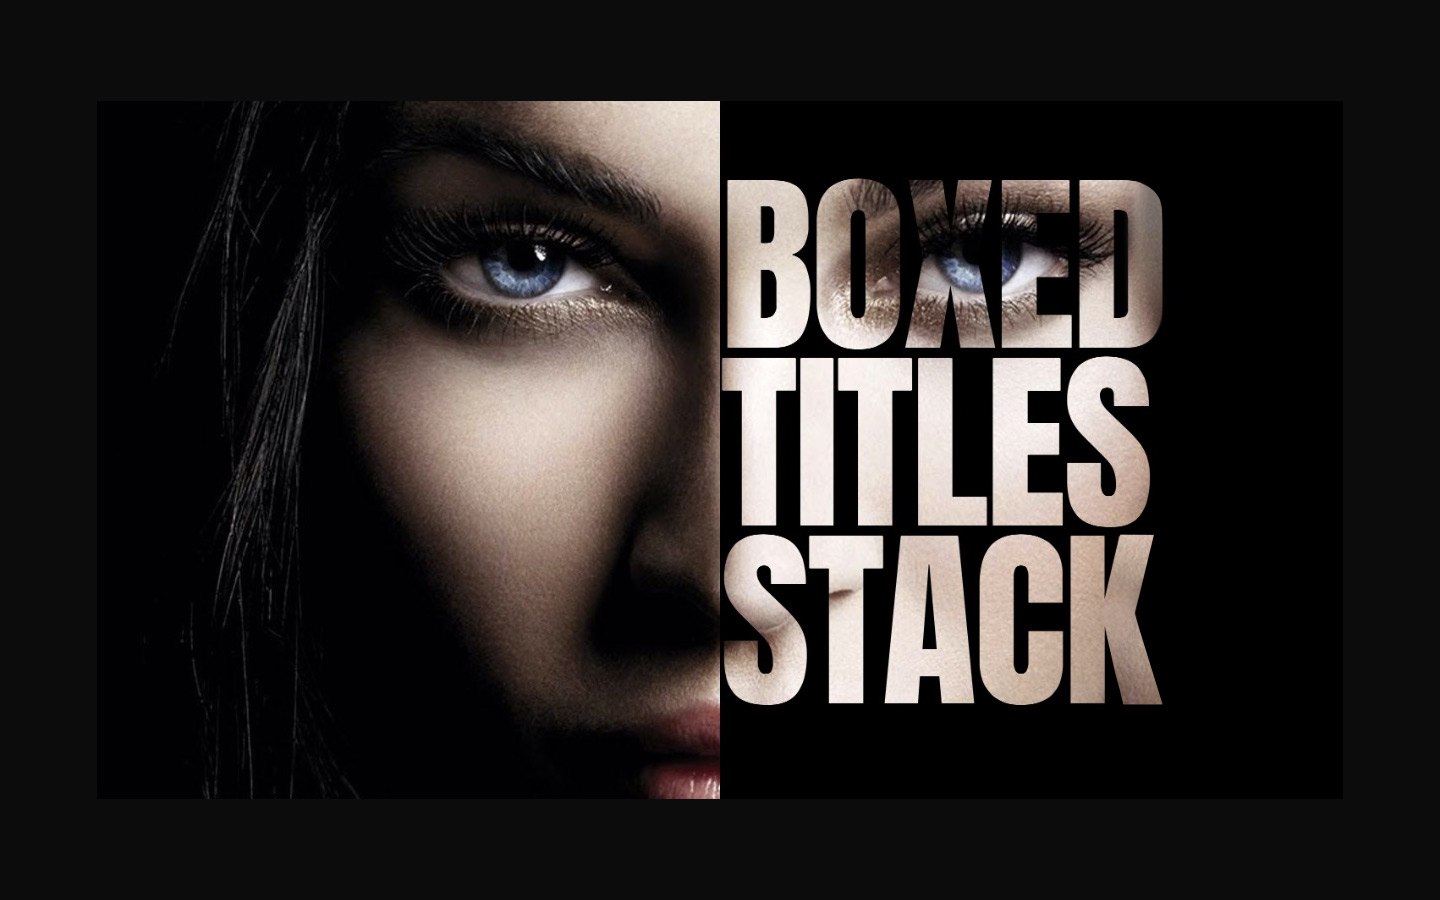 stack_boxedtitles__preview_cover